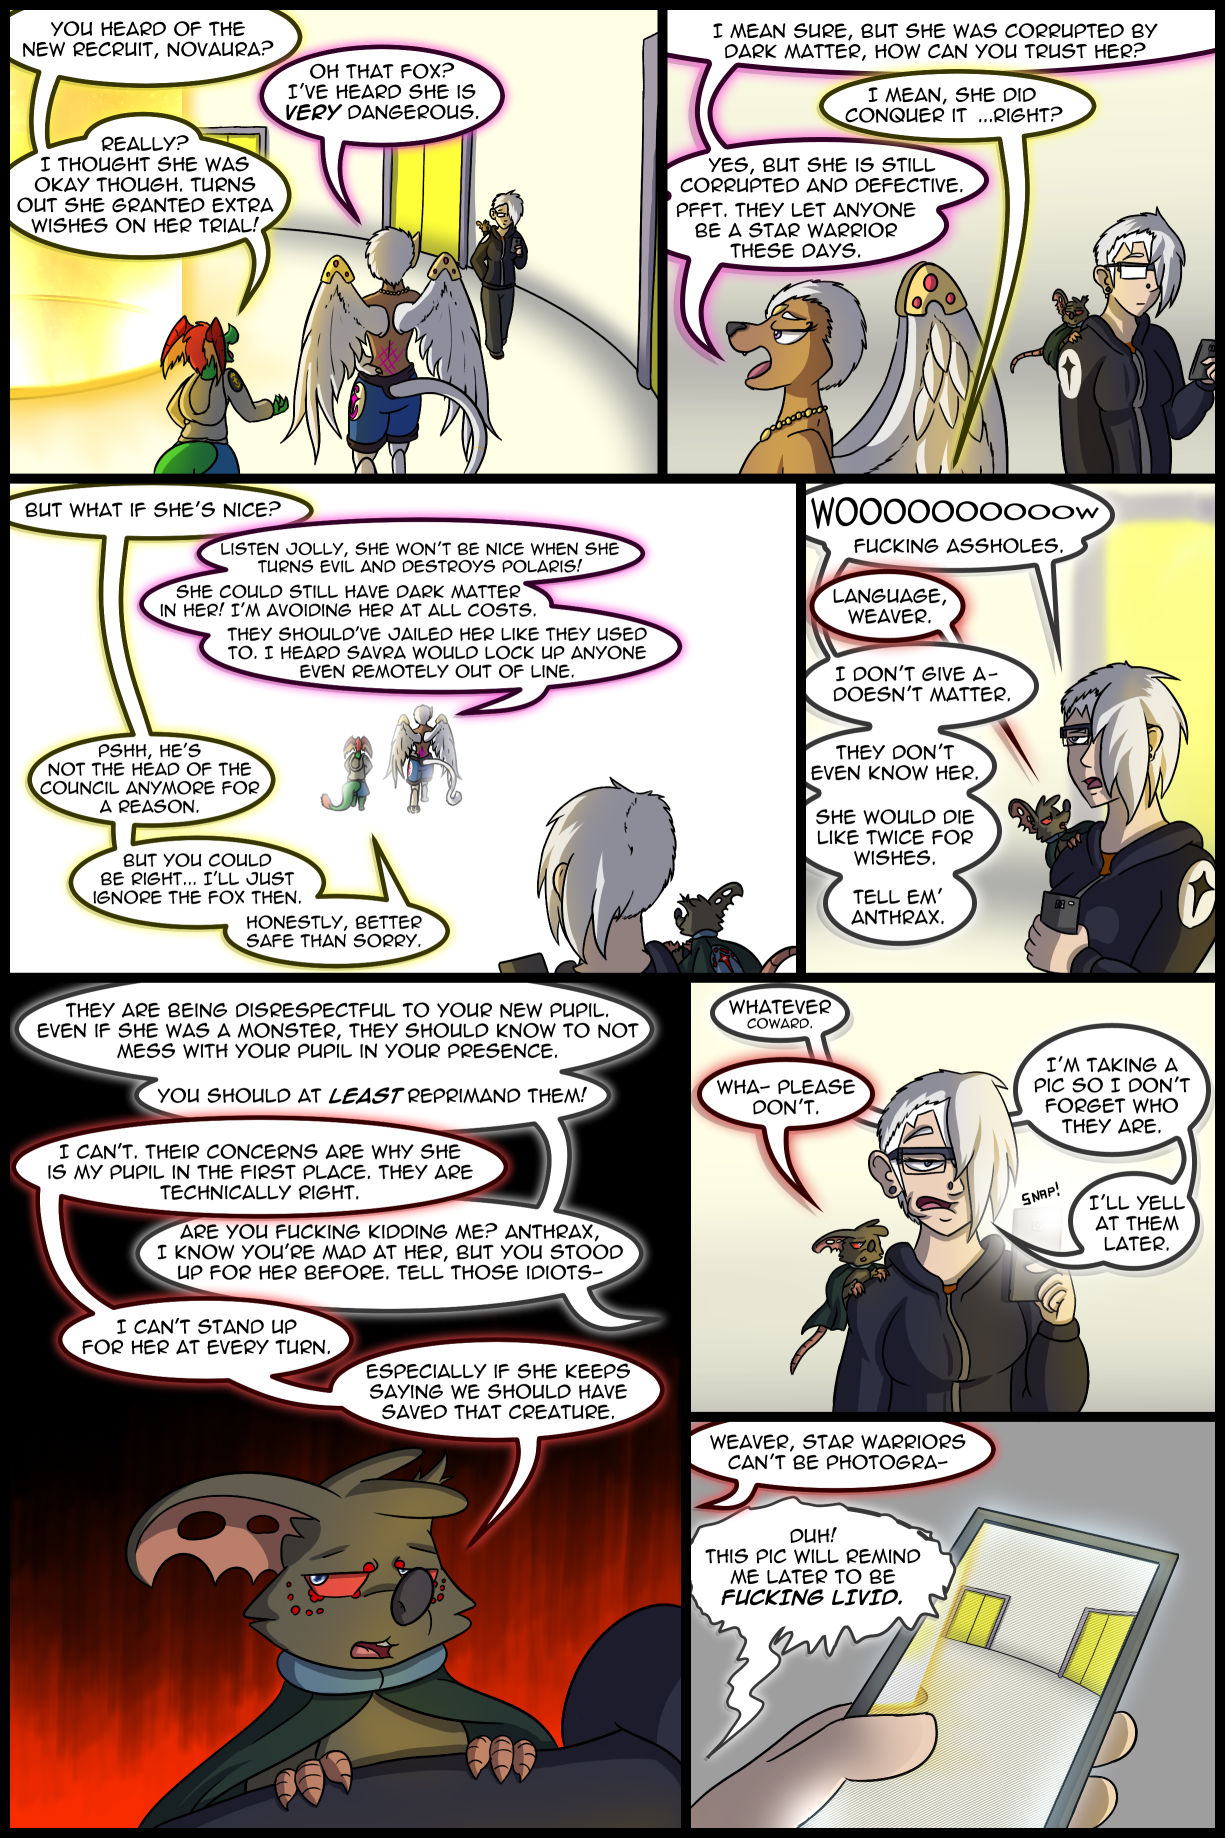 Ch4 Page 21 – Rumors